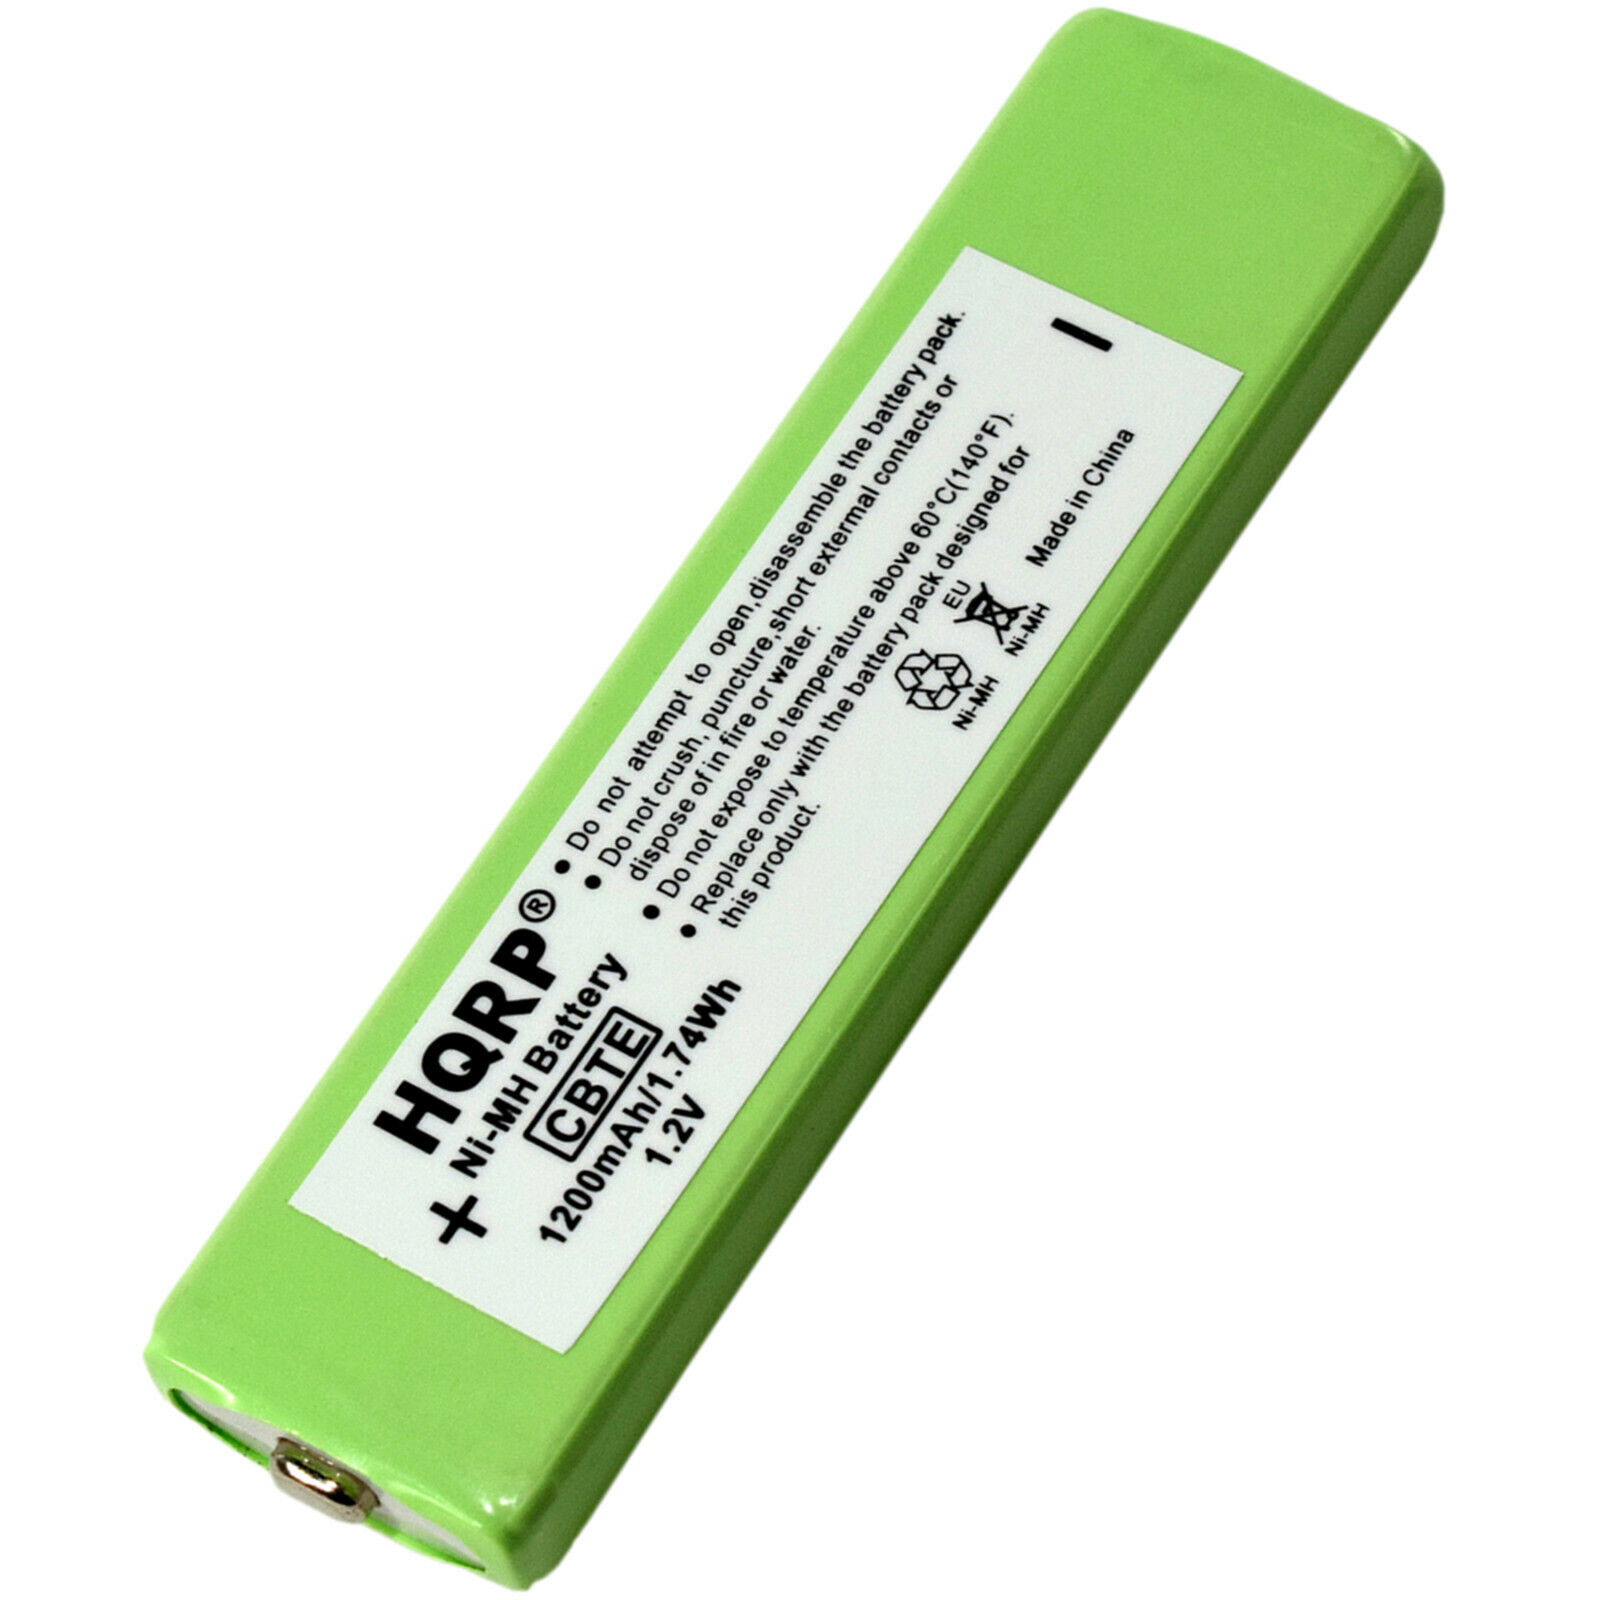 Battery Replacement for NH-10WM Portable CD / MD / MP3